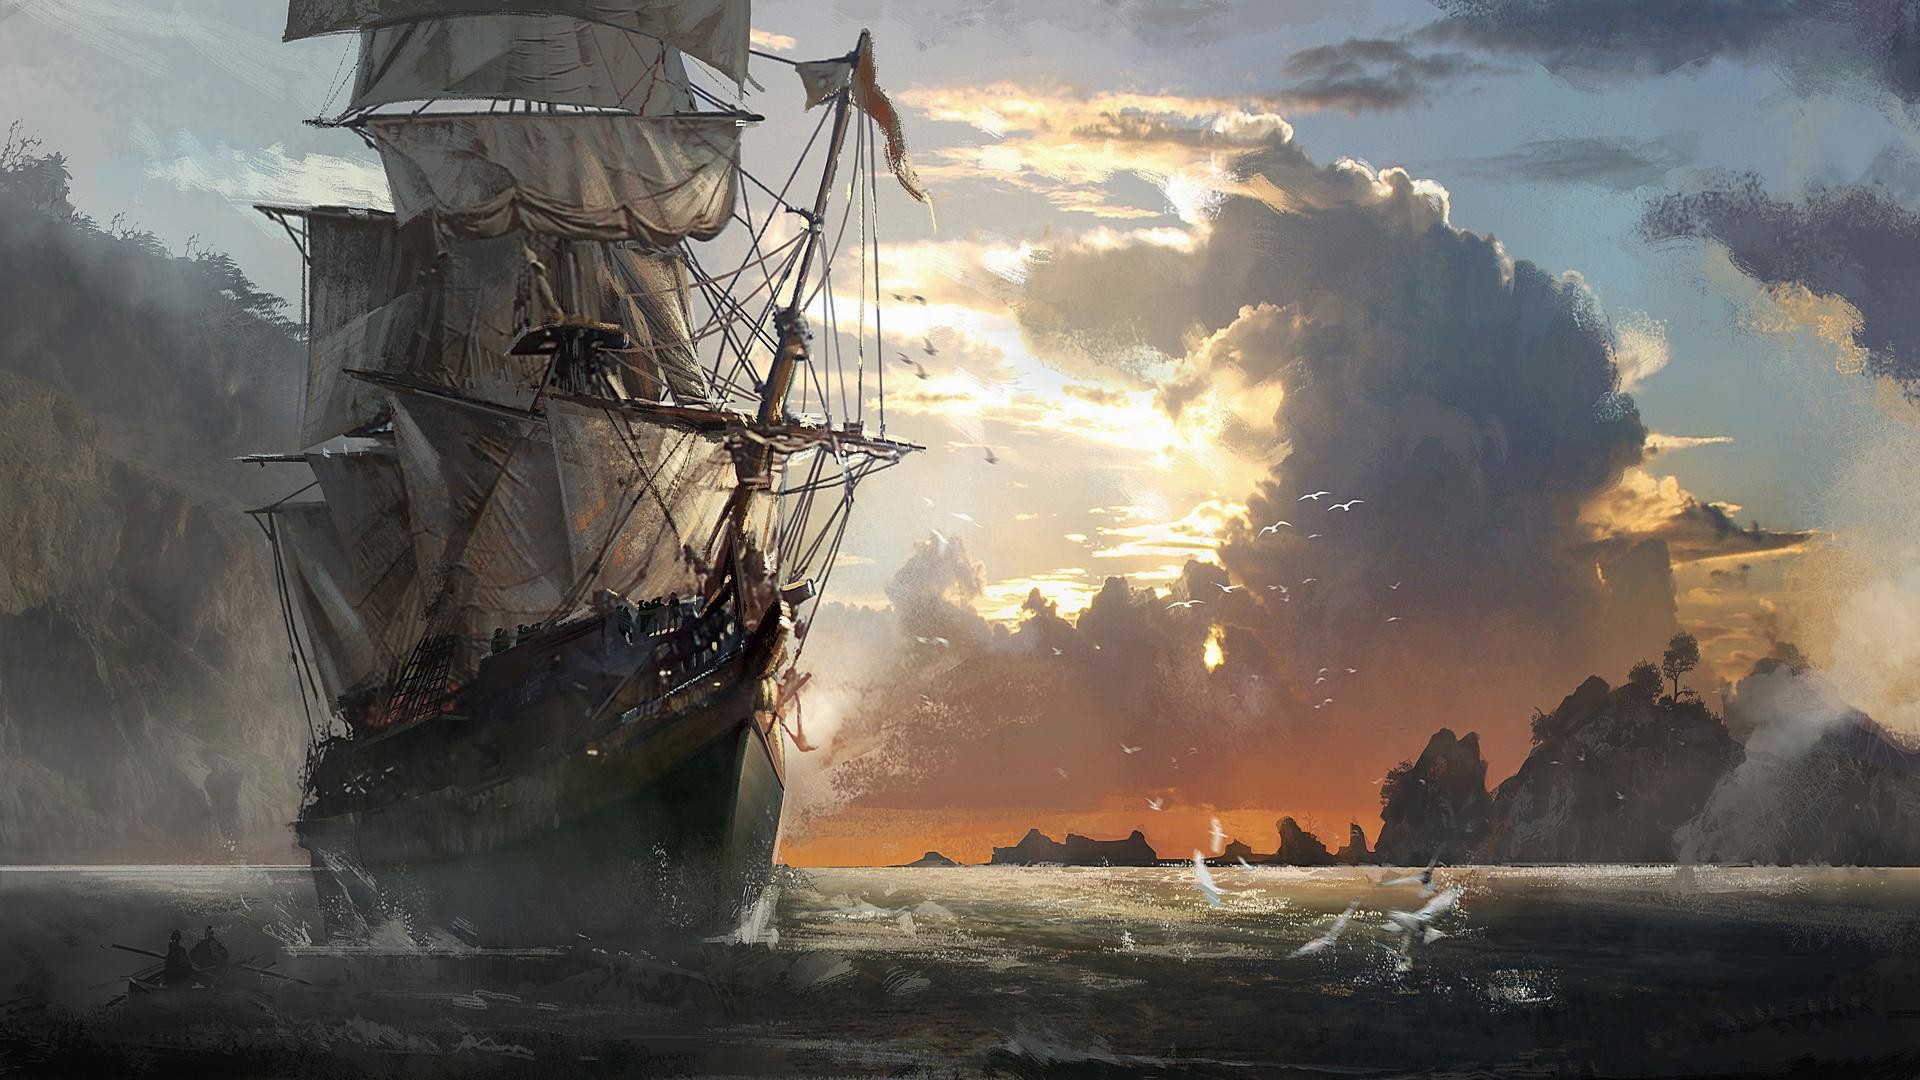 1920x1080 wallpaper.wiki-Pirate-Wallpapers-PIC-WPE001848